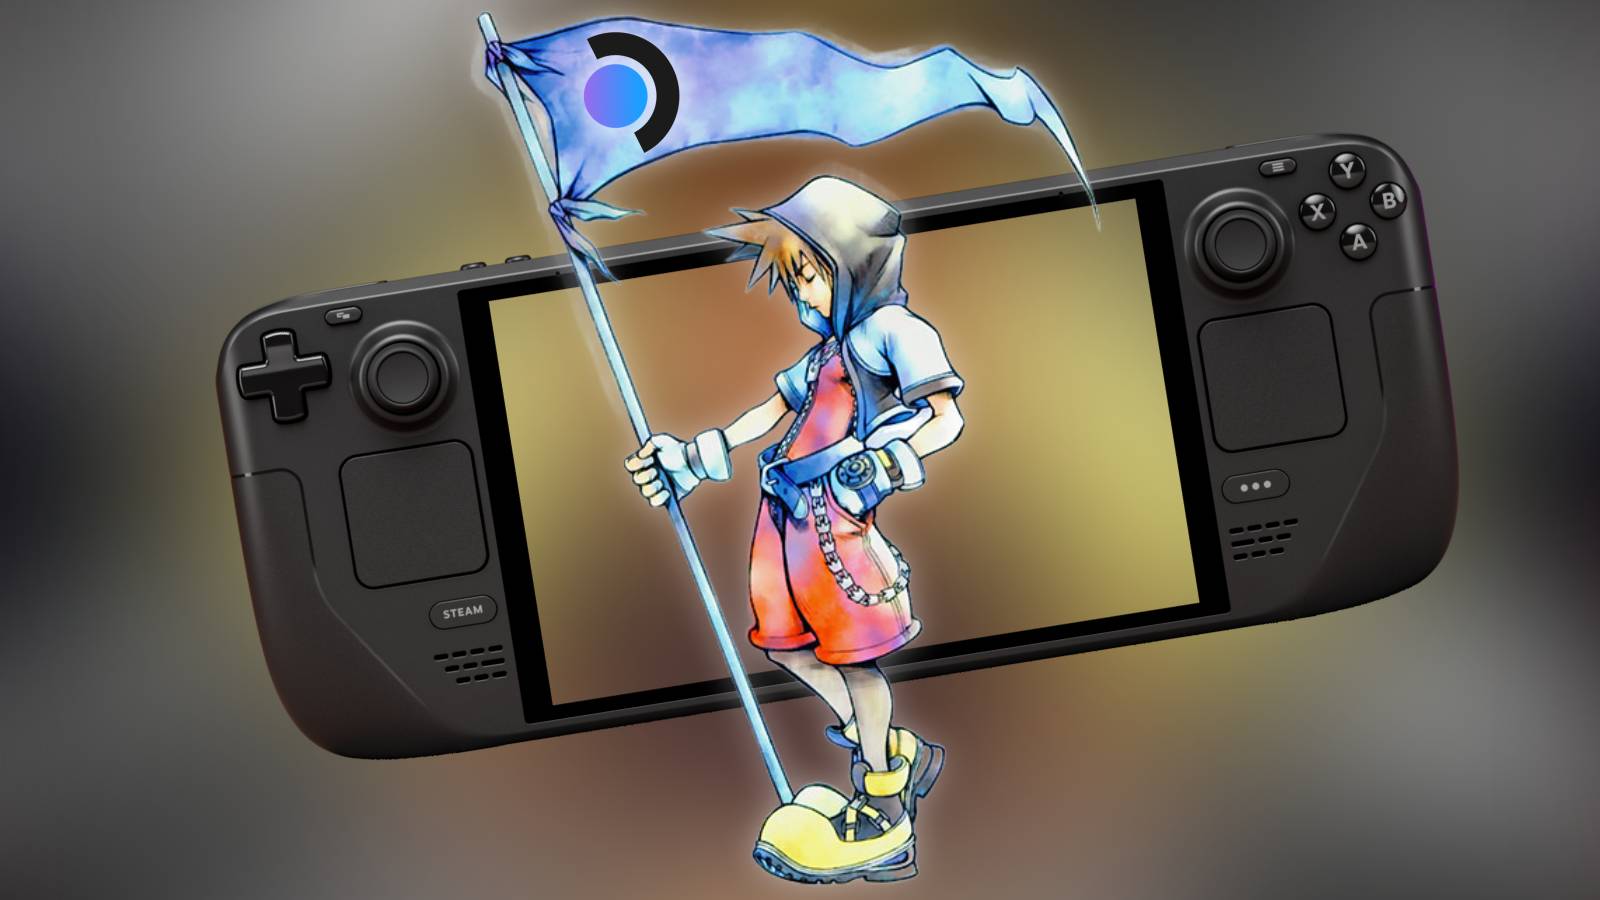 Official art of Sora from Kingdom Hearts holding a flag with the Steam Deck logo, with a Steam Deck behind him.